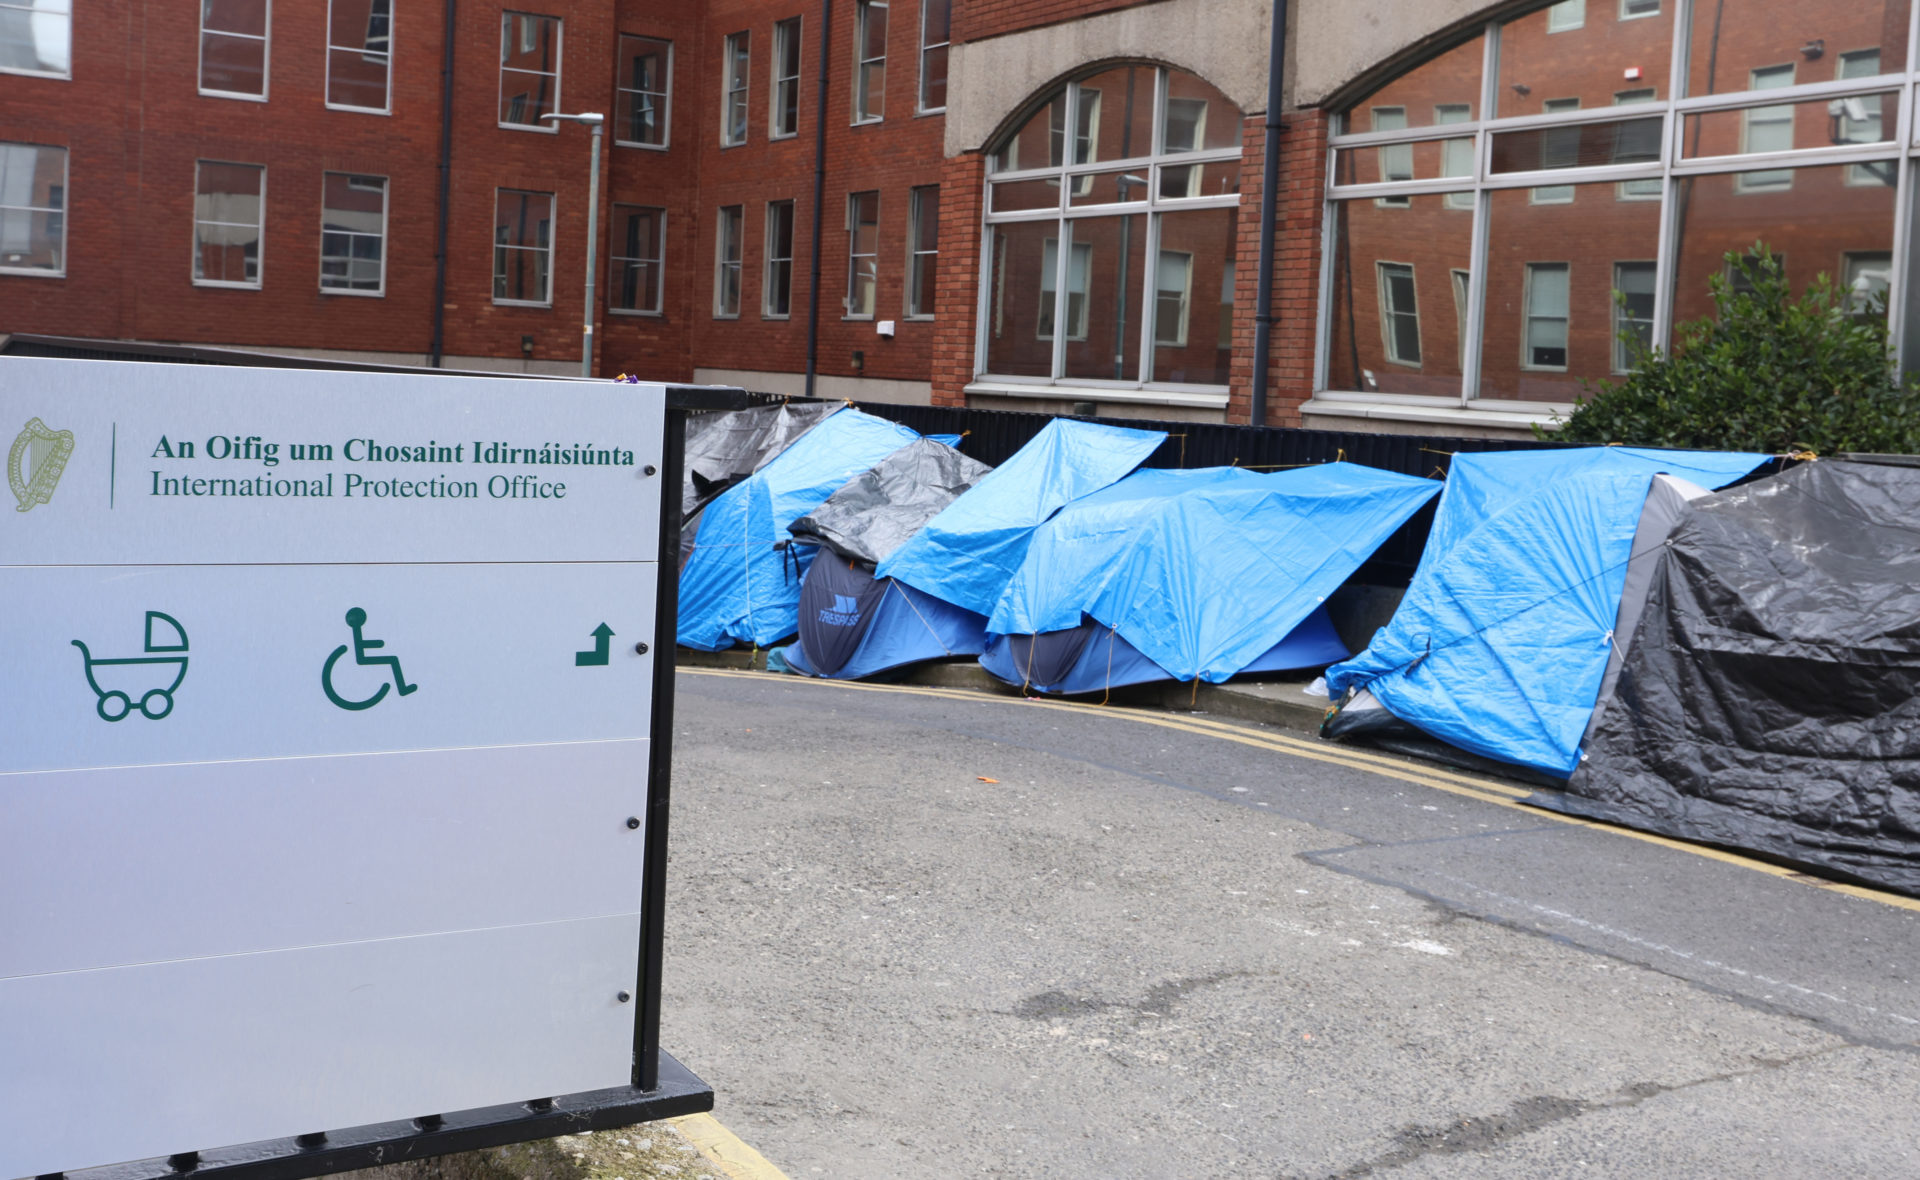  Tents outside the International Protection Office in Dublin city, 7-3-24. 